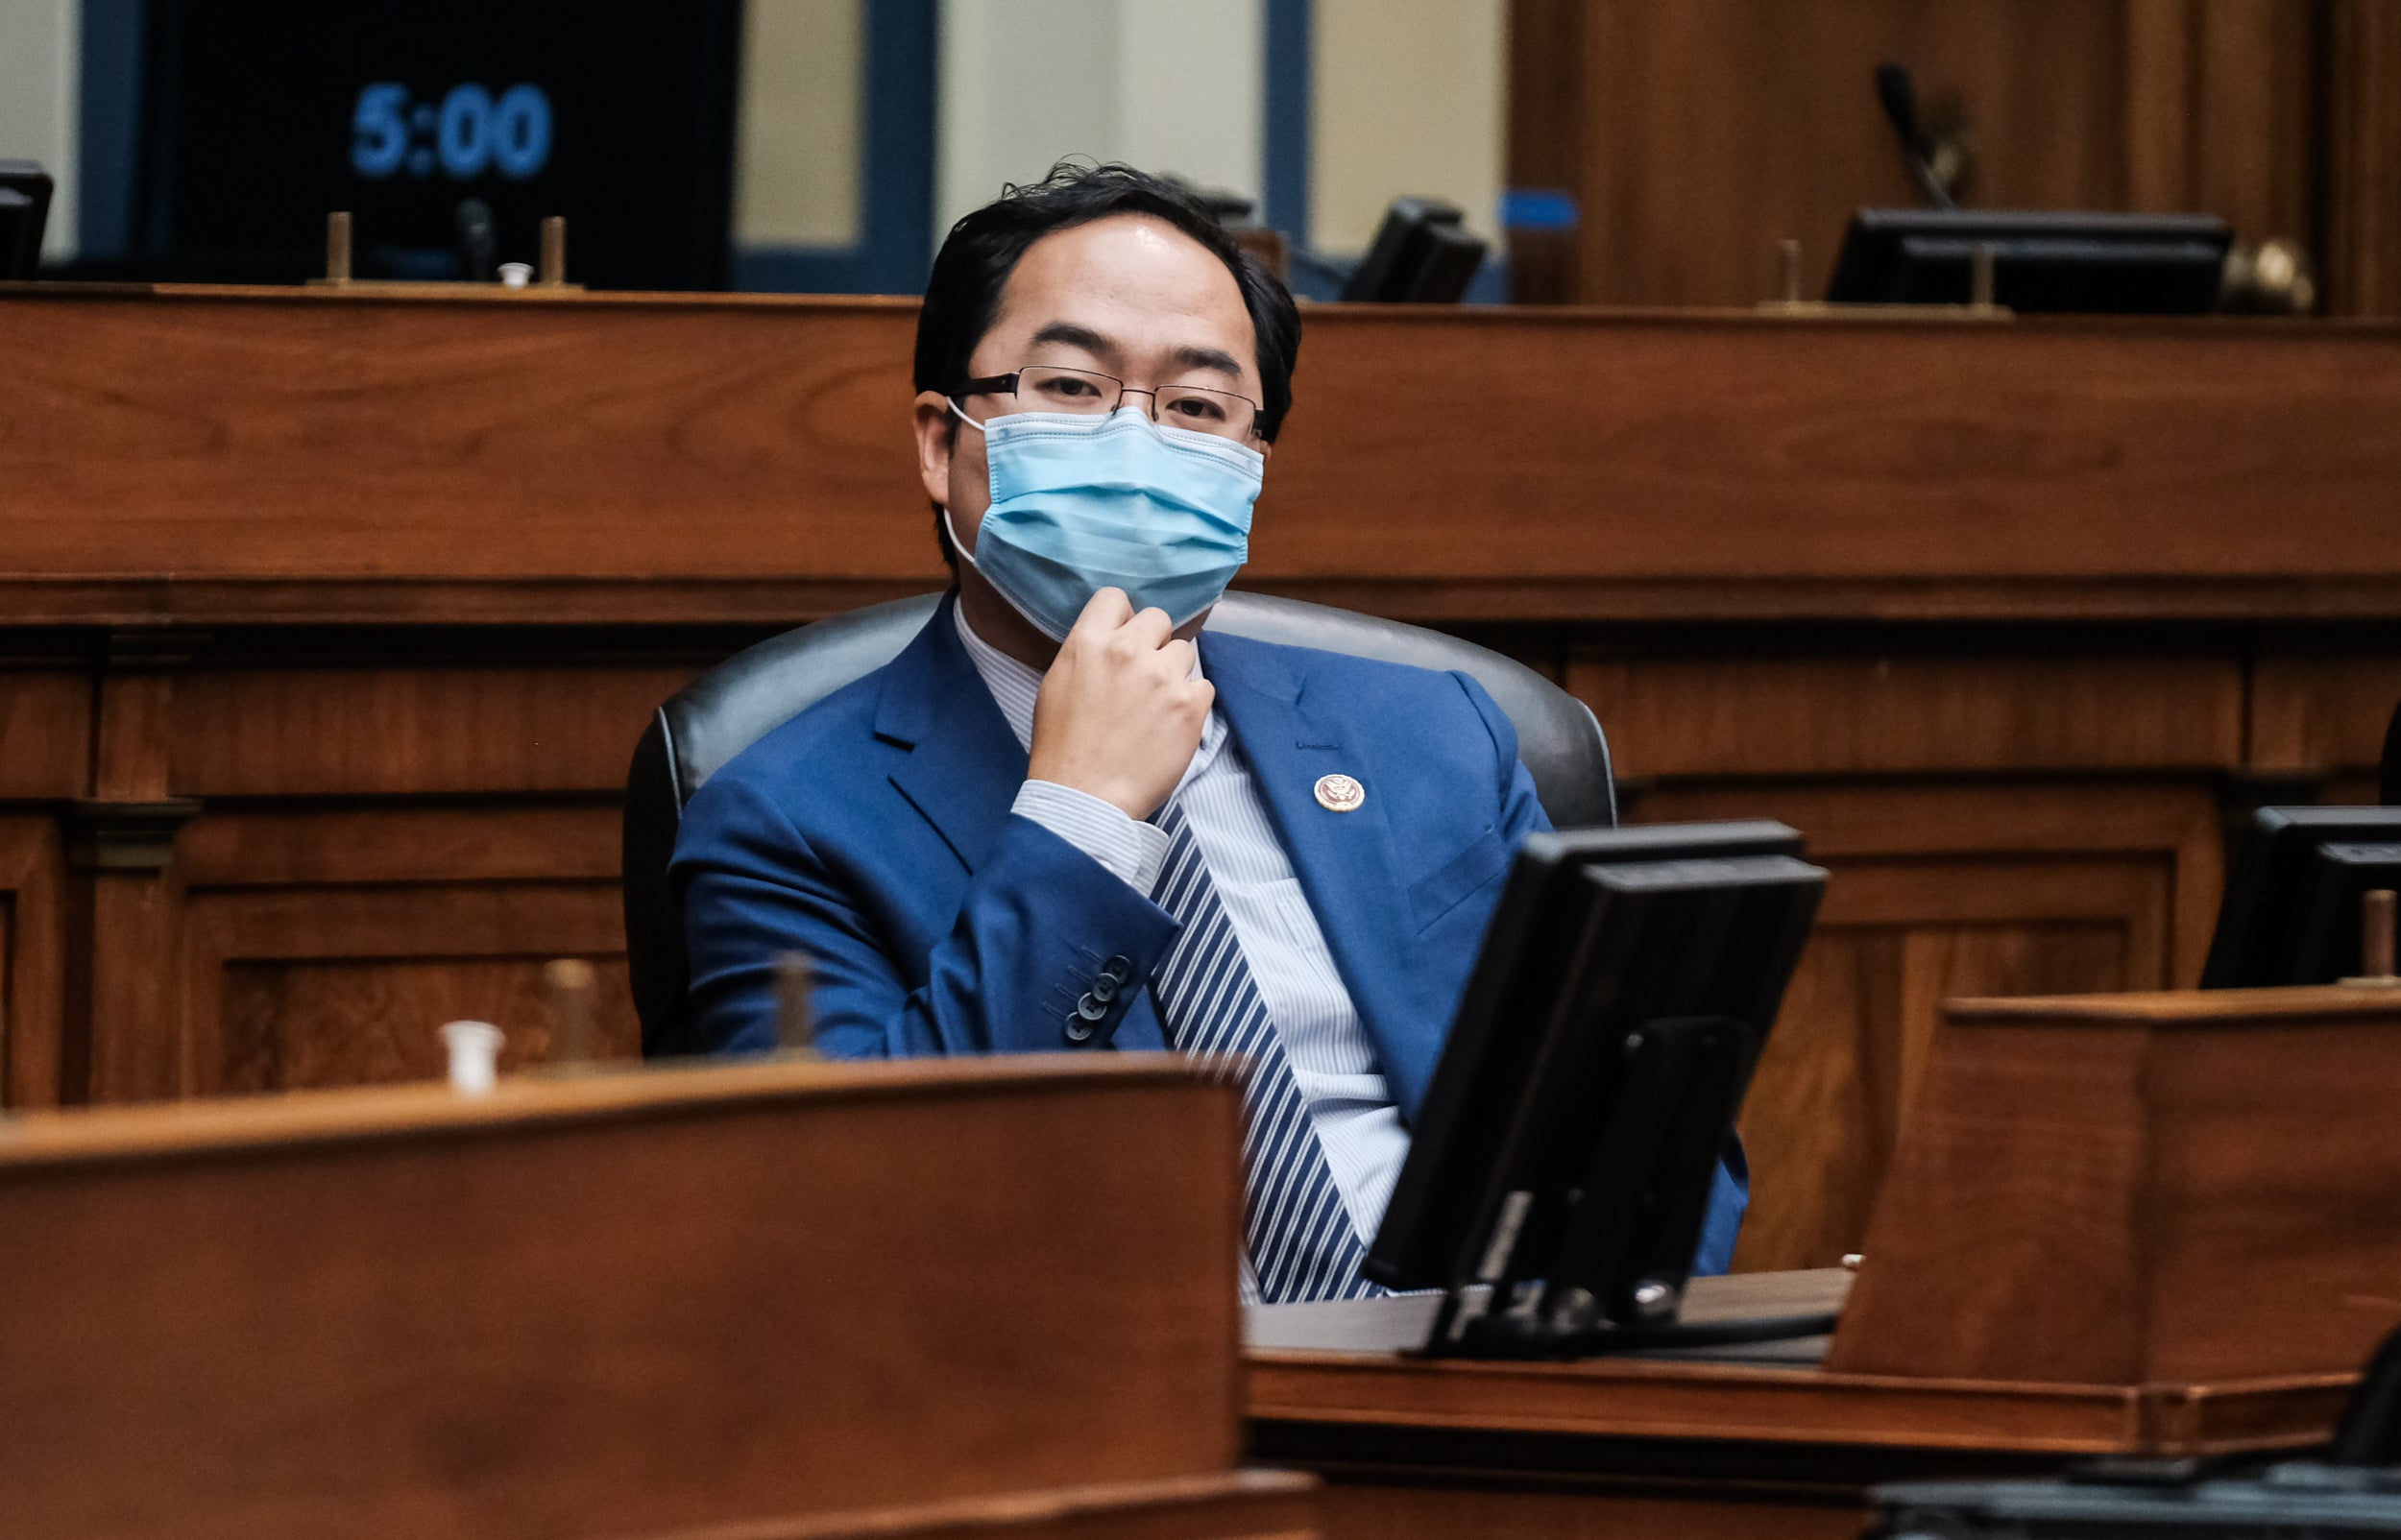 Rep Andy Kim in the Rayburn Building on 2 October 2020 in Washington, DC